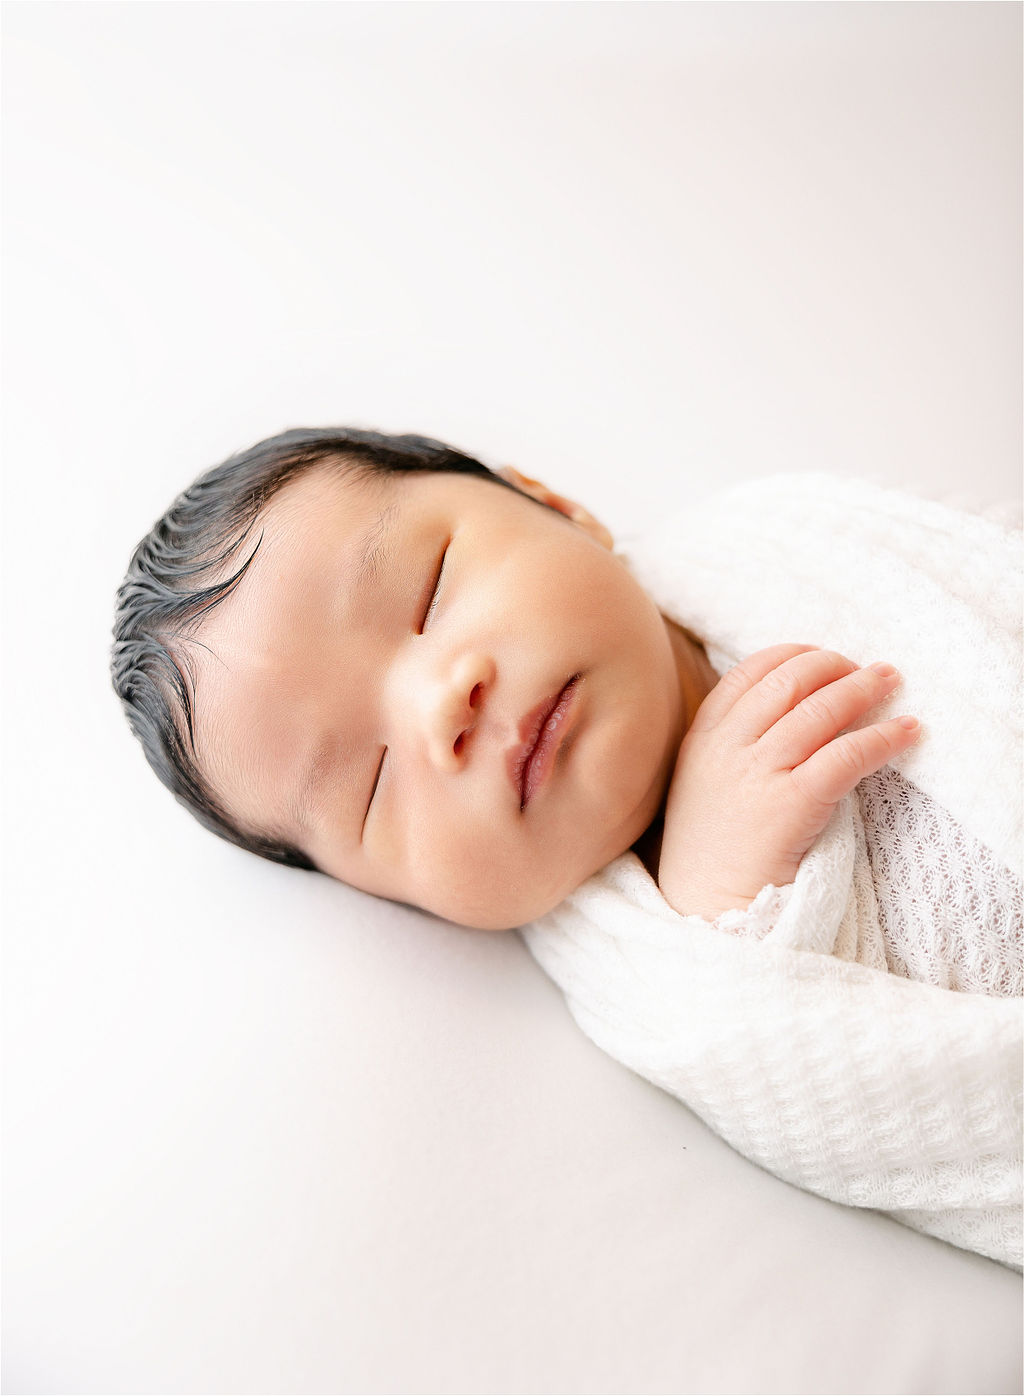 A newborn baby sleeps on a white bed in a studio